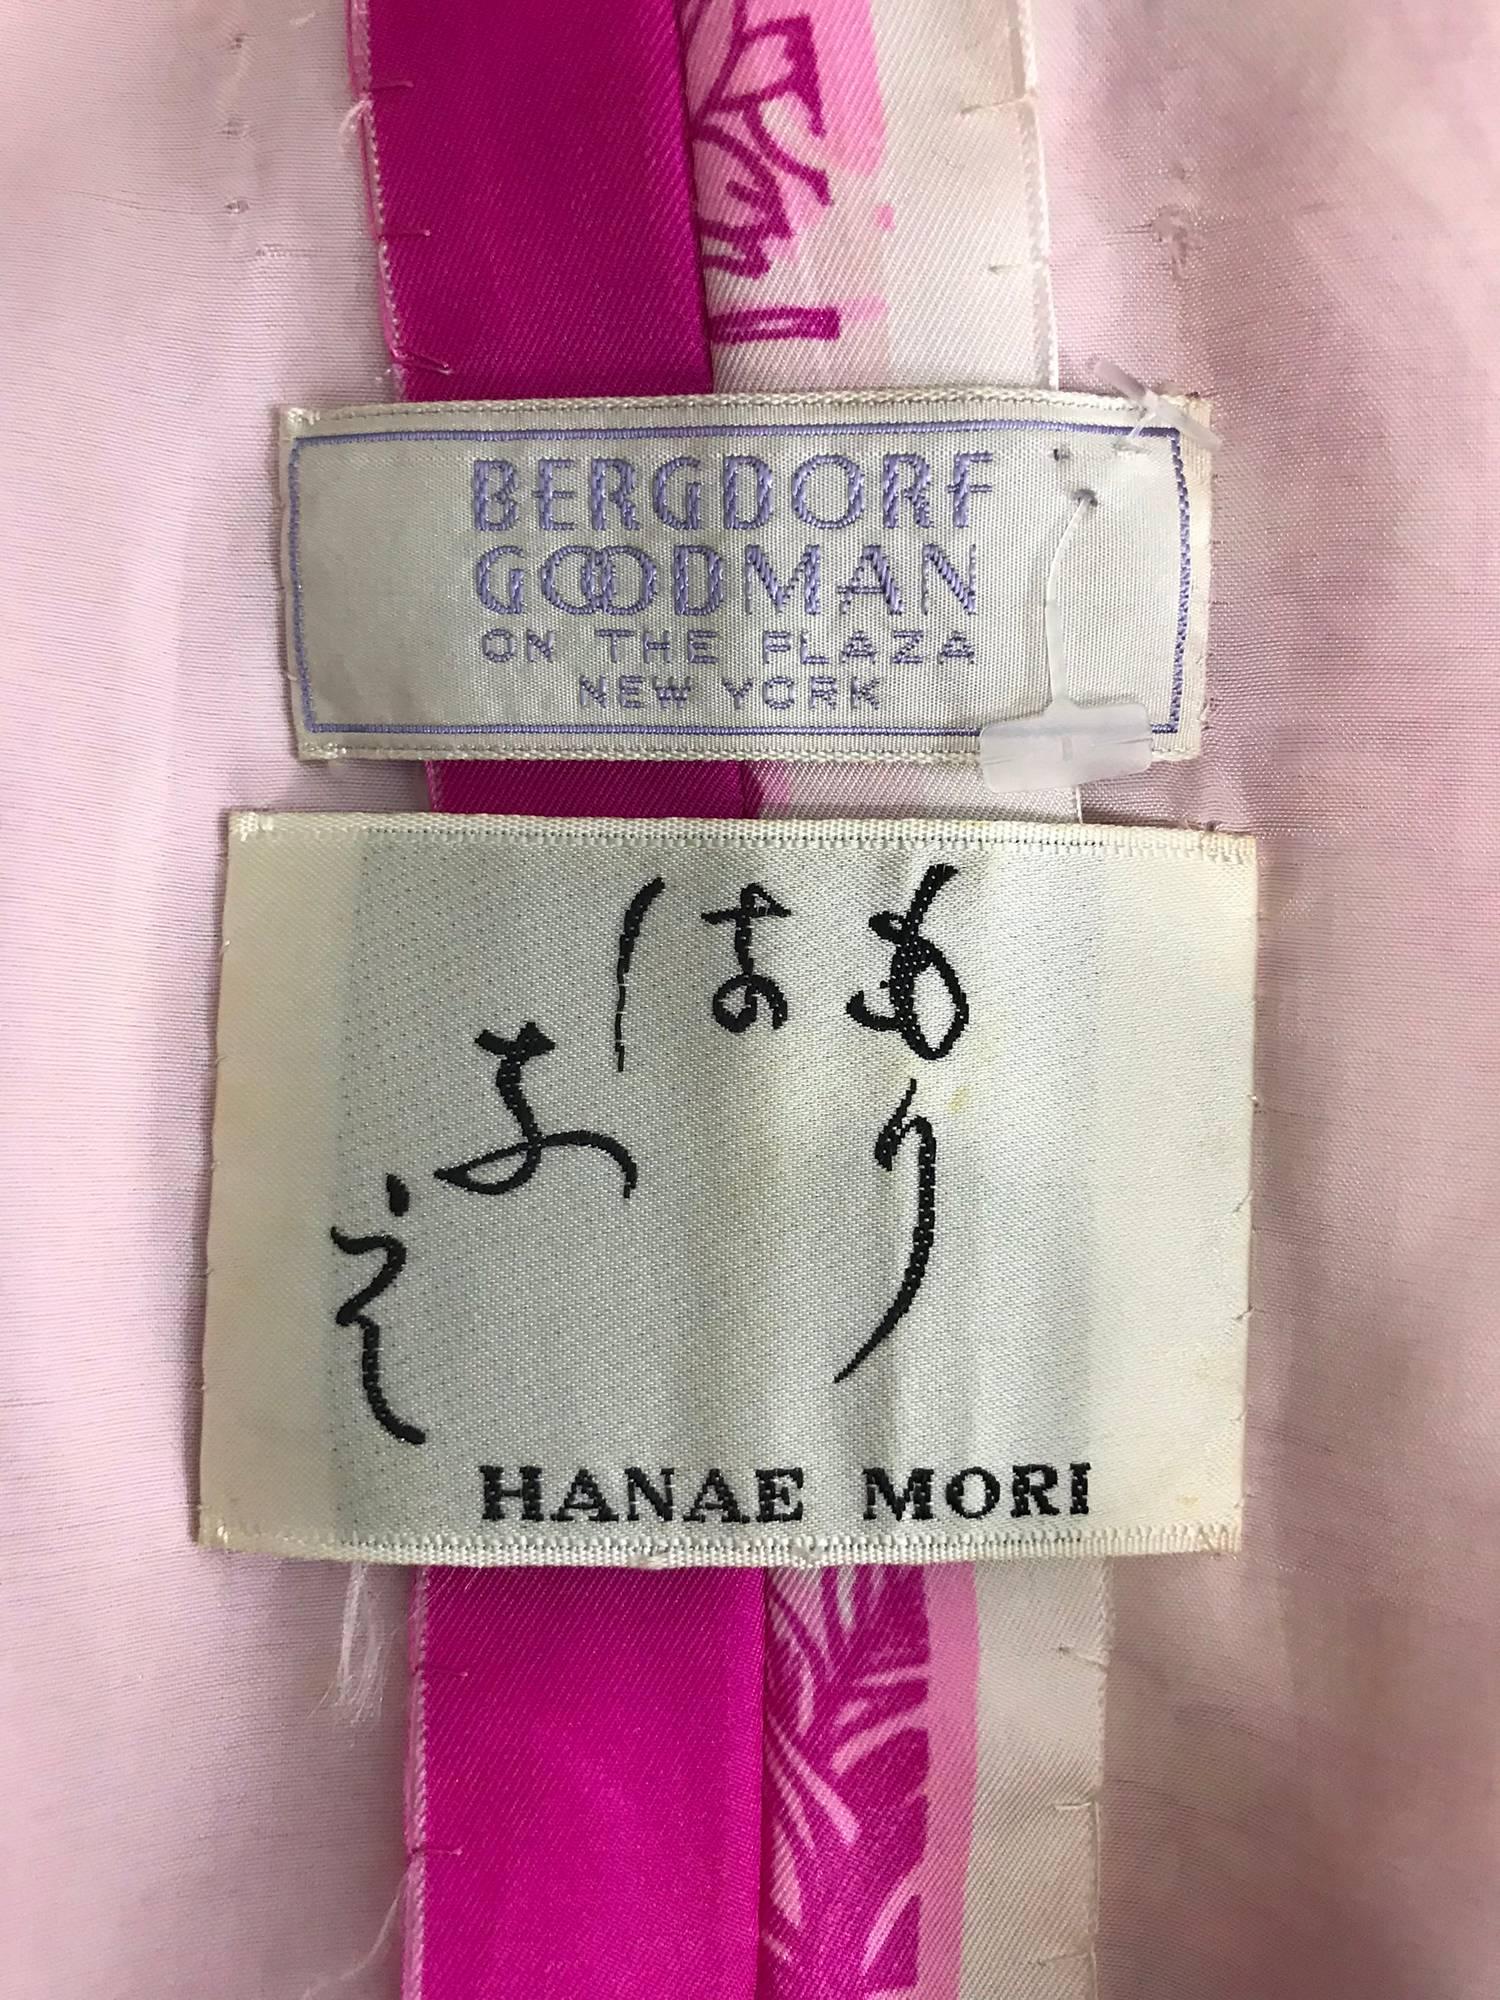 Hanae Mori pink floral silk kimono evening set in The Mets Collection 1966-69 2